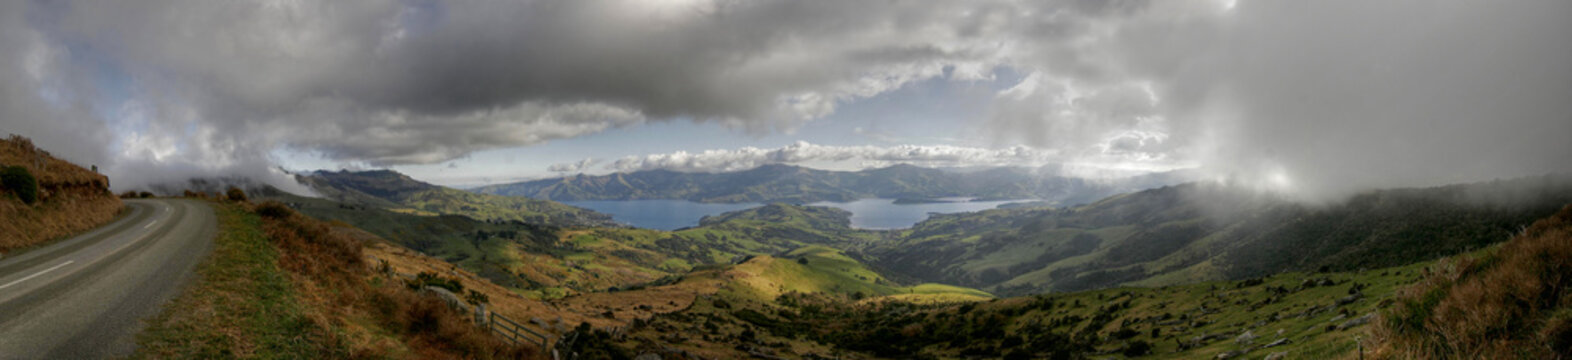 Panorama from the hills in New Zealand